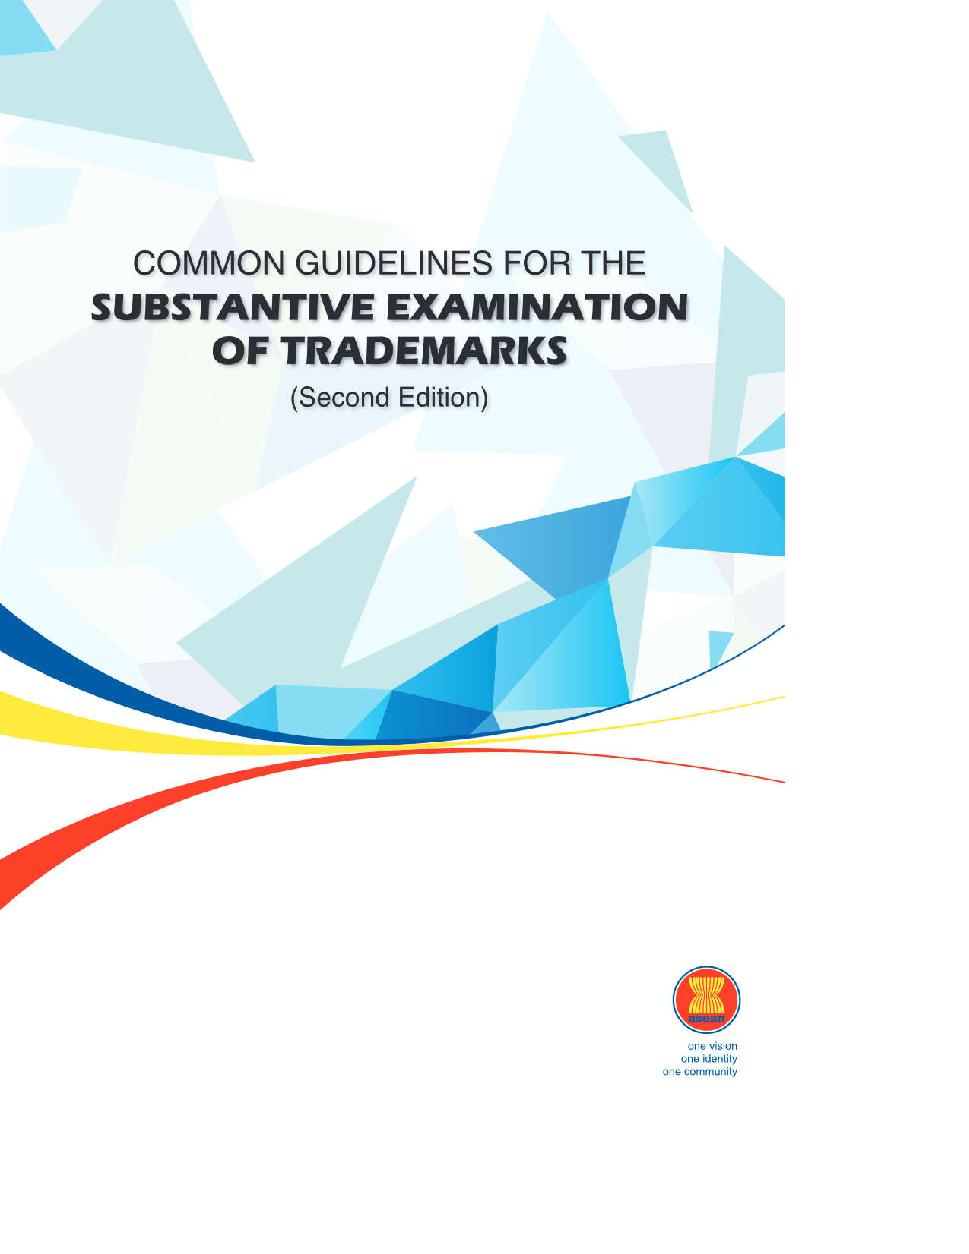 Common Guidelines for the Substantive Examination of Trademarks (Second Edition 2020)